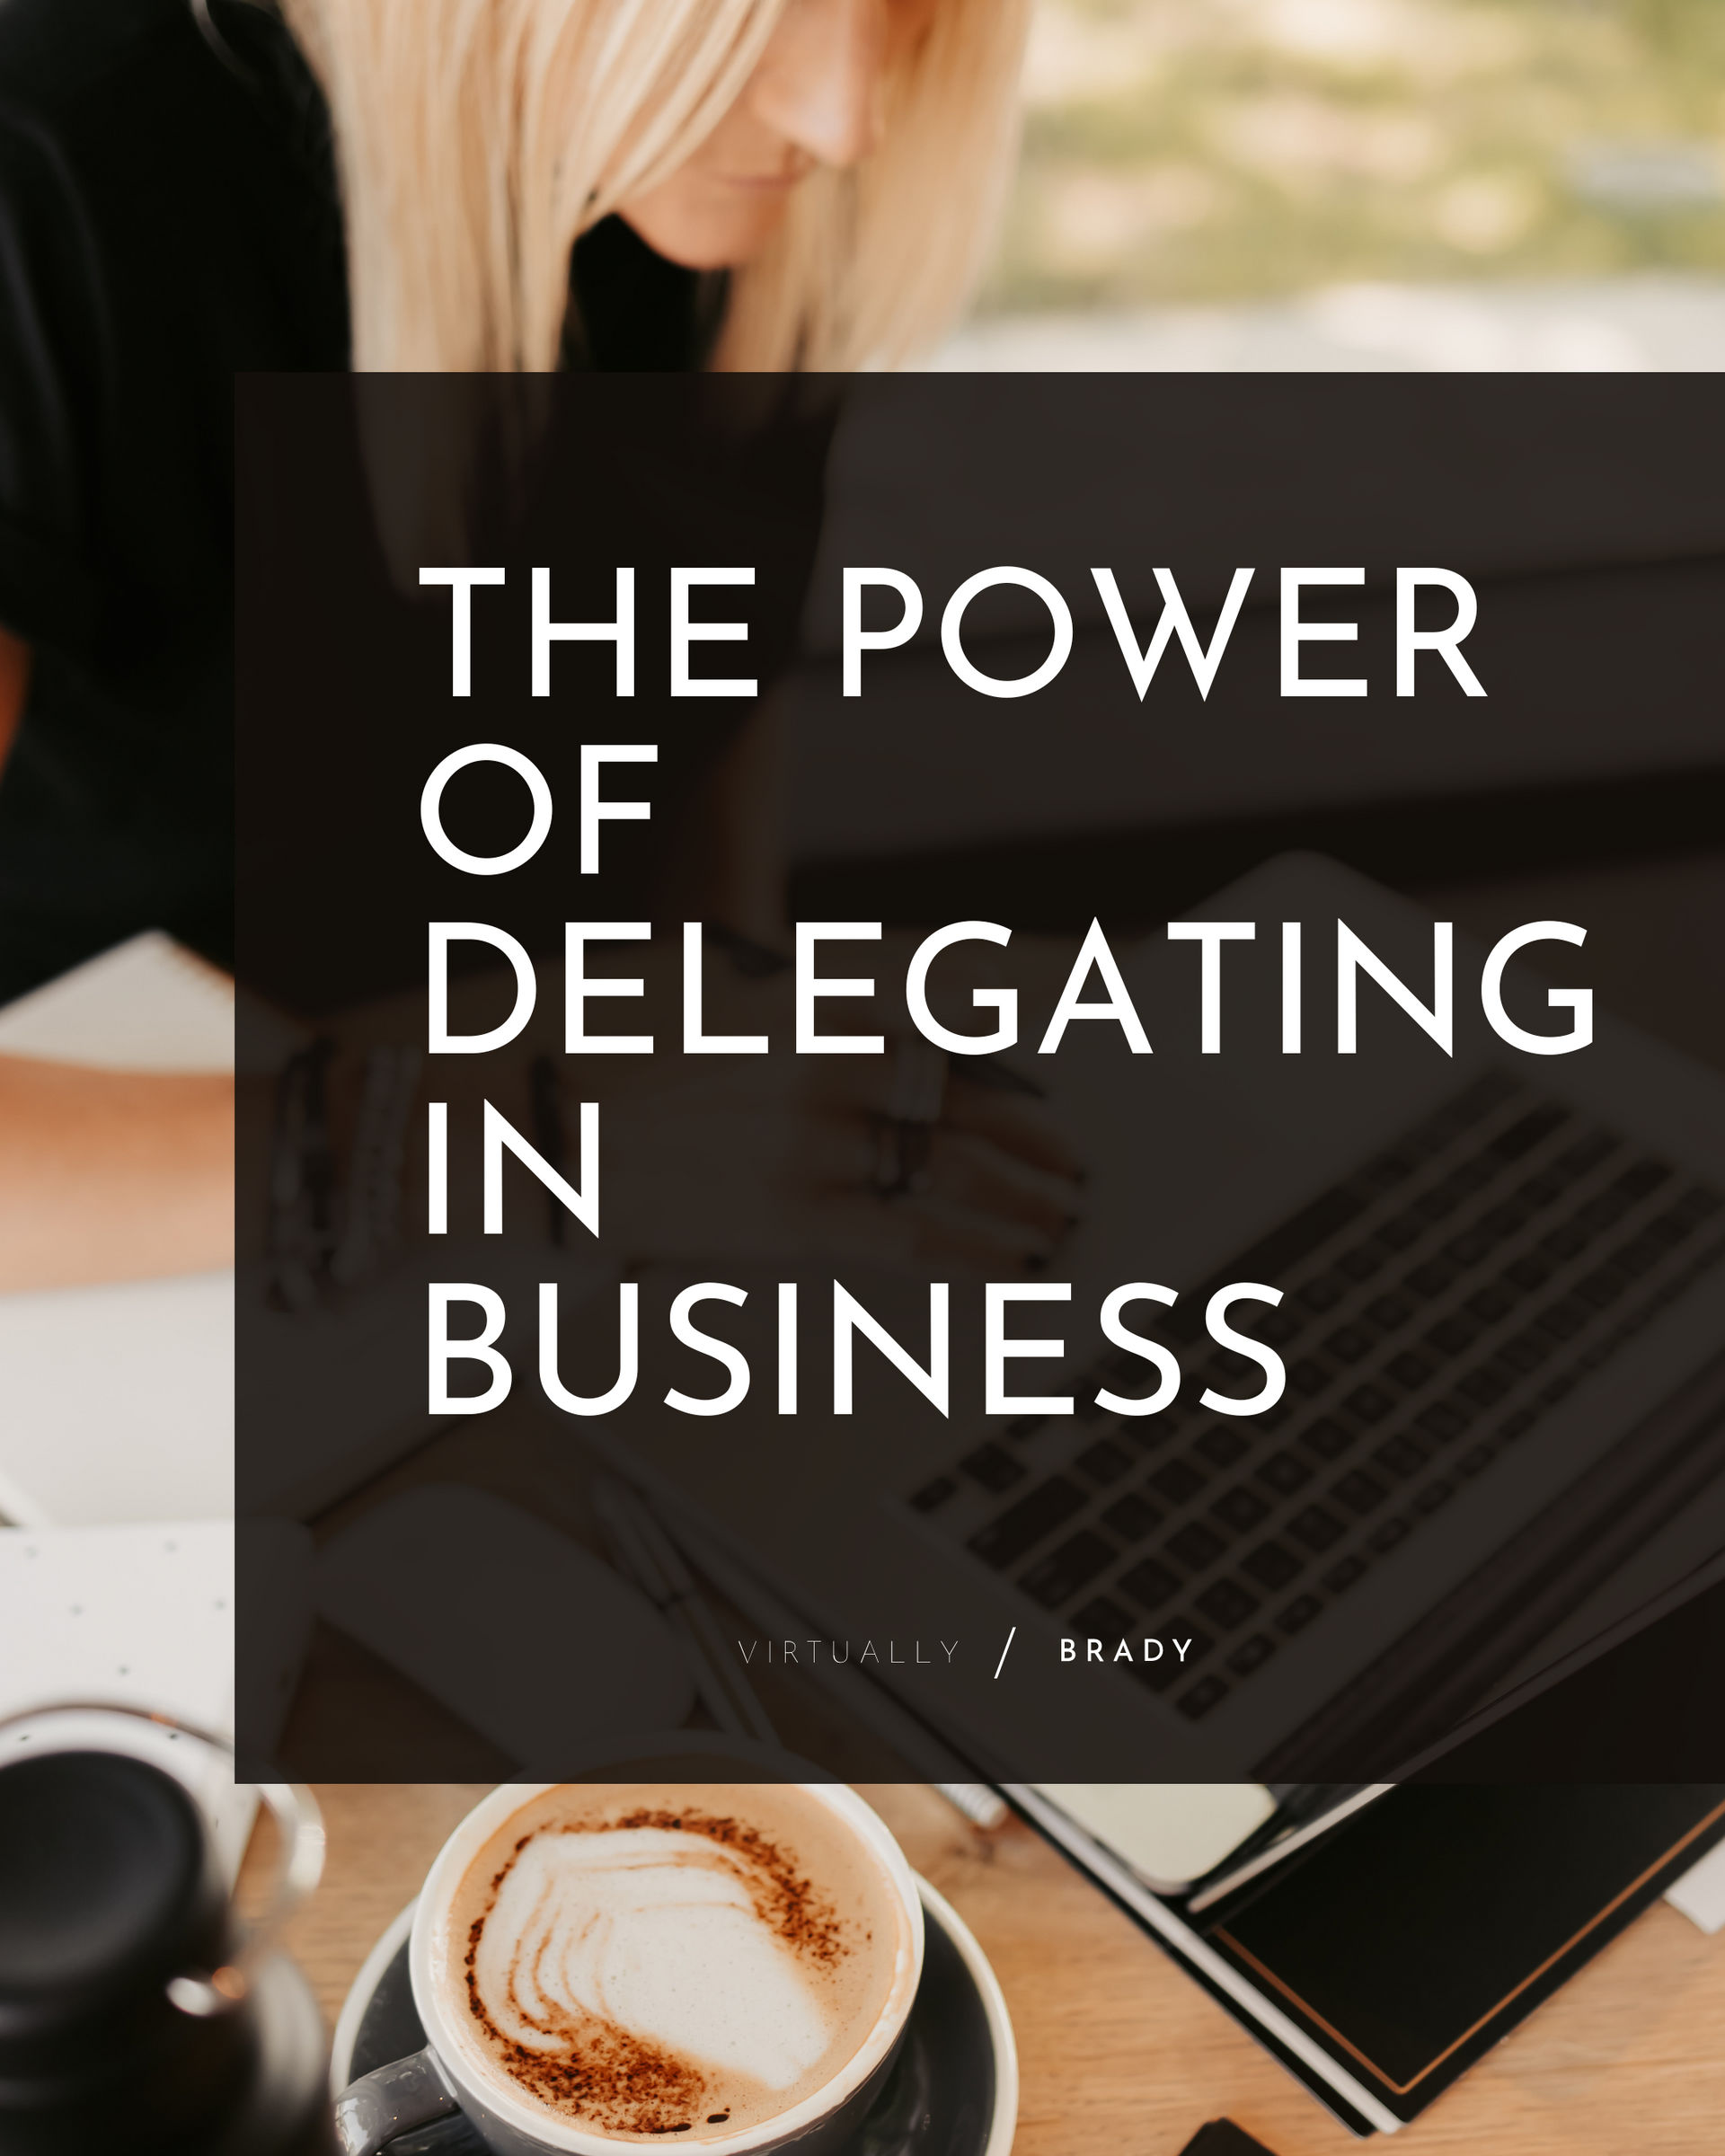 The Power of Delegating in Business